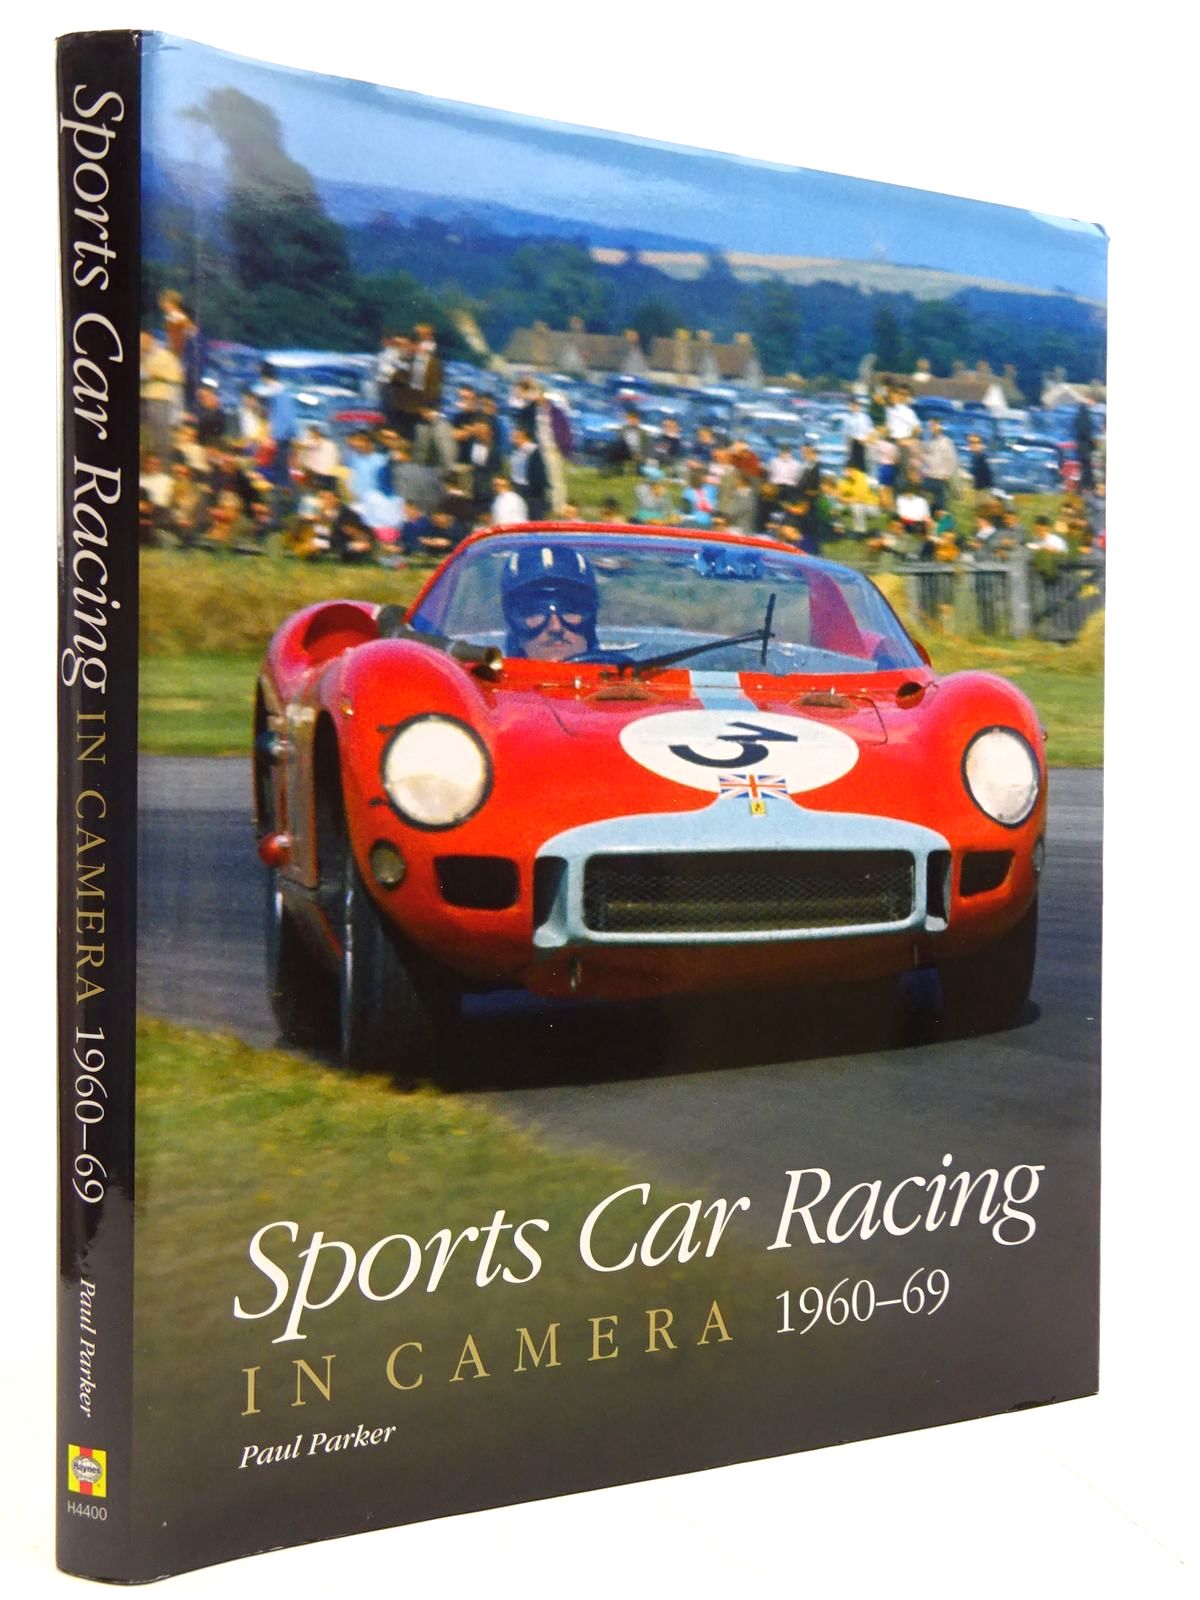 Photo of SPORTS CAR RACING IN CAMERA 1960-69 written by Parker, Paul published by Haynes (STOCK CODE: 2131229)  for sale by Stella & Rose's Books